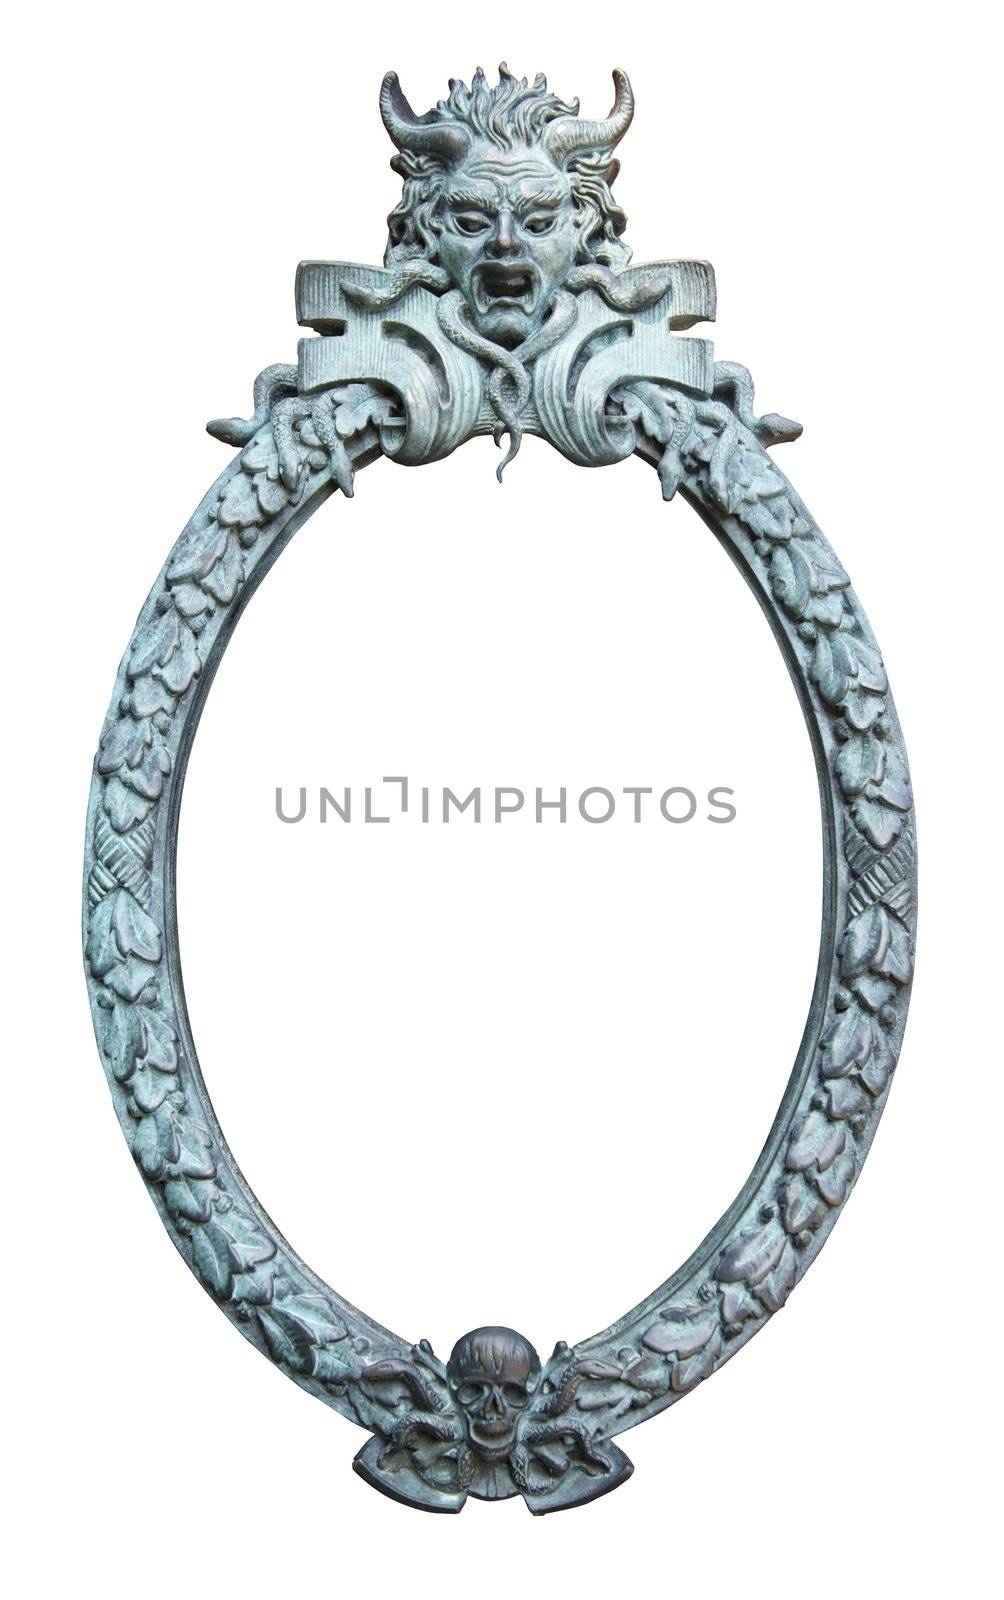 An oval, spooky, isolated metal frame with a horned devil, skull and crossbones, snakes and leaves. Great for Halloween.